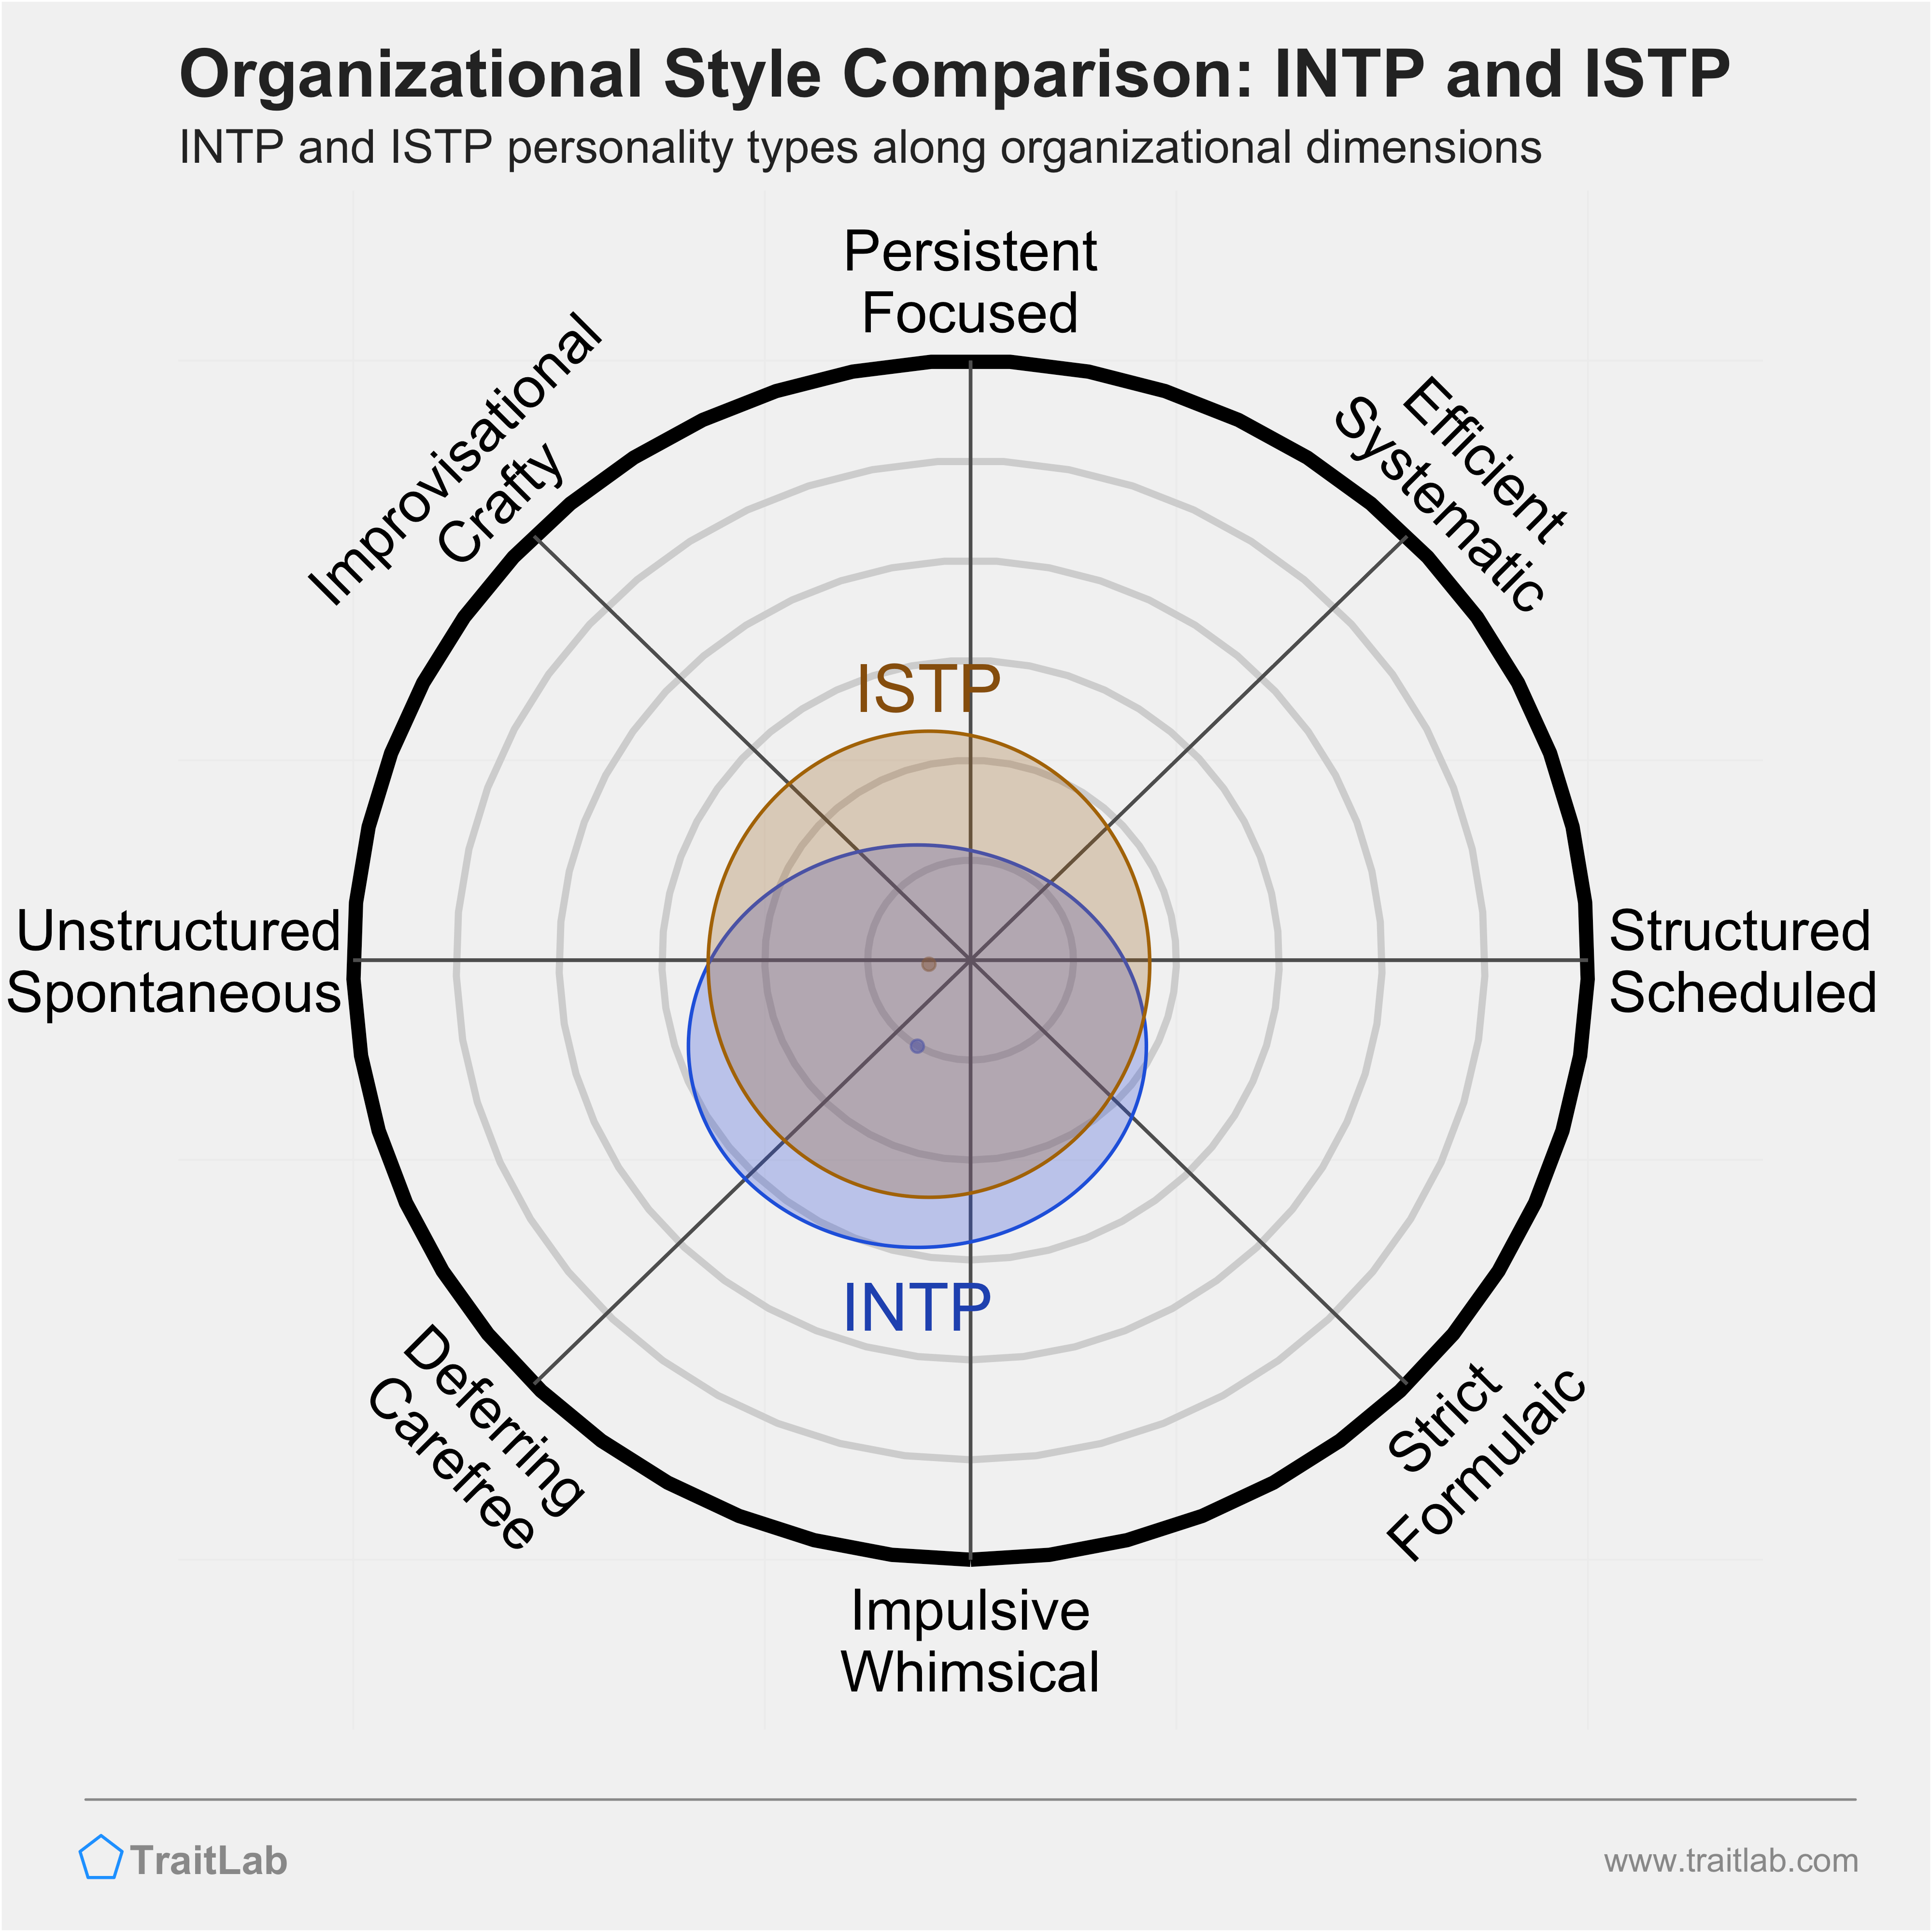 INTP and ISTP comparison across organizational dimensions